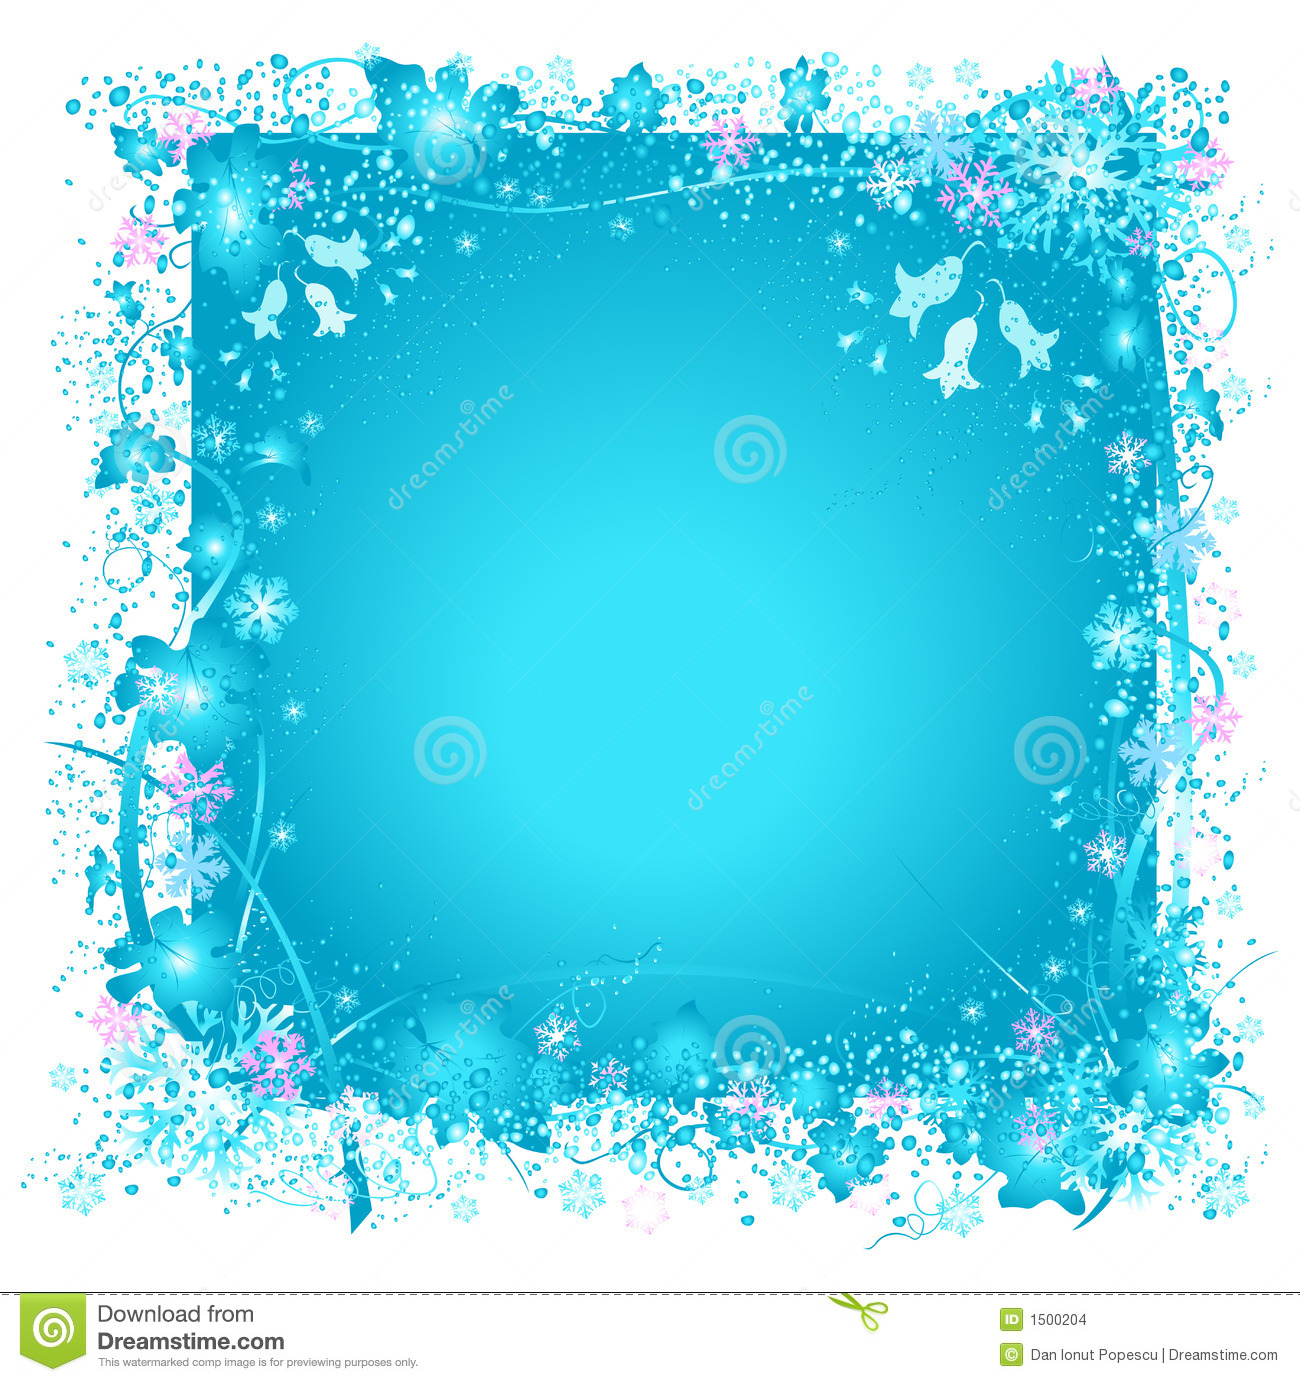 Frozen Nature Snowflakes And Ice Decorative Frame With Snowflakes